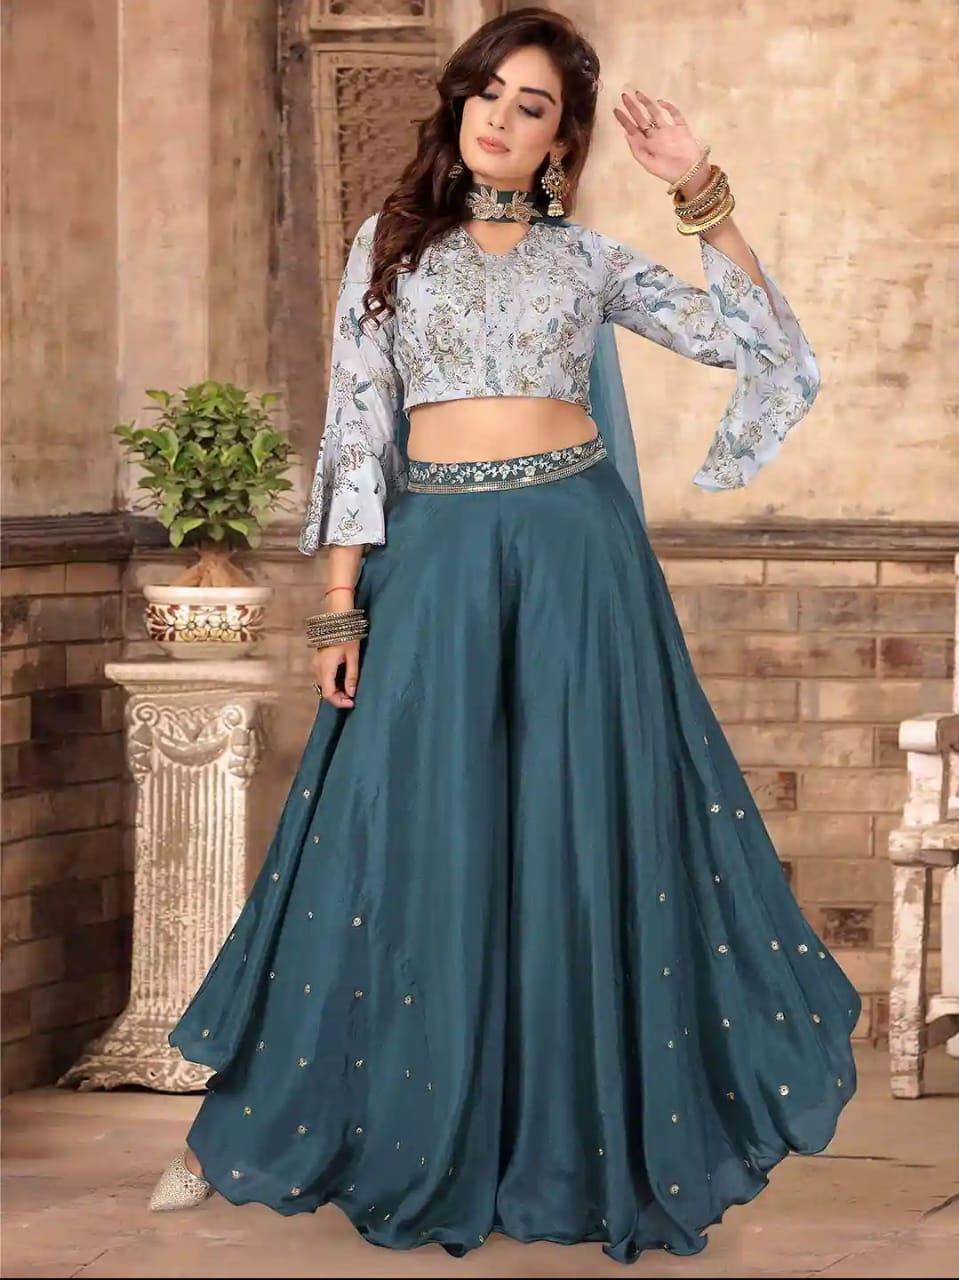 Beautiful baby blue suit with pins dupatta. Beautiful color combination. |  Indian designer wear, Dress indian style, Indian designer outfits